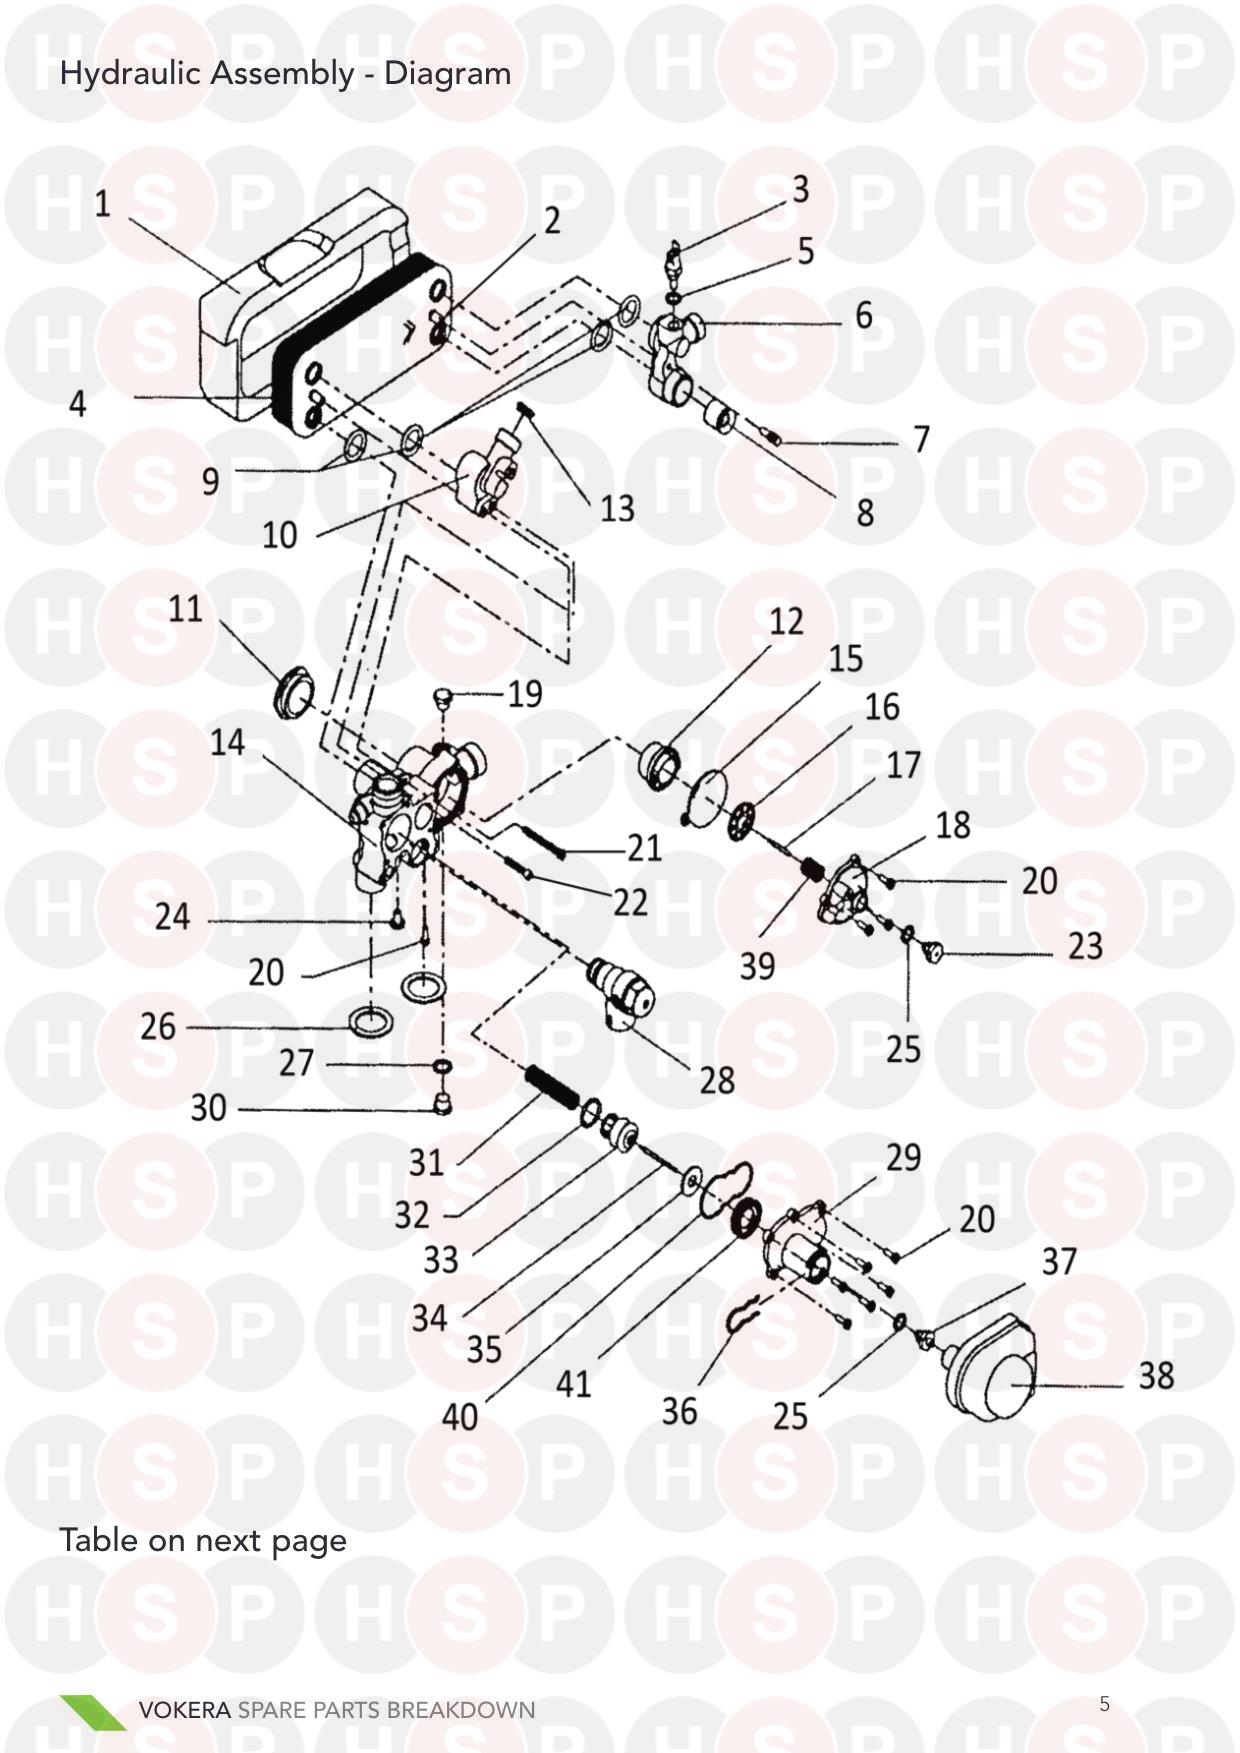 Hydraulics diagram for Vokera Linea 28 Mark 1 Ser #r Up To 164370001